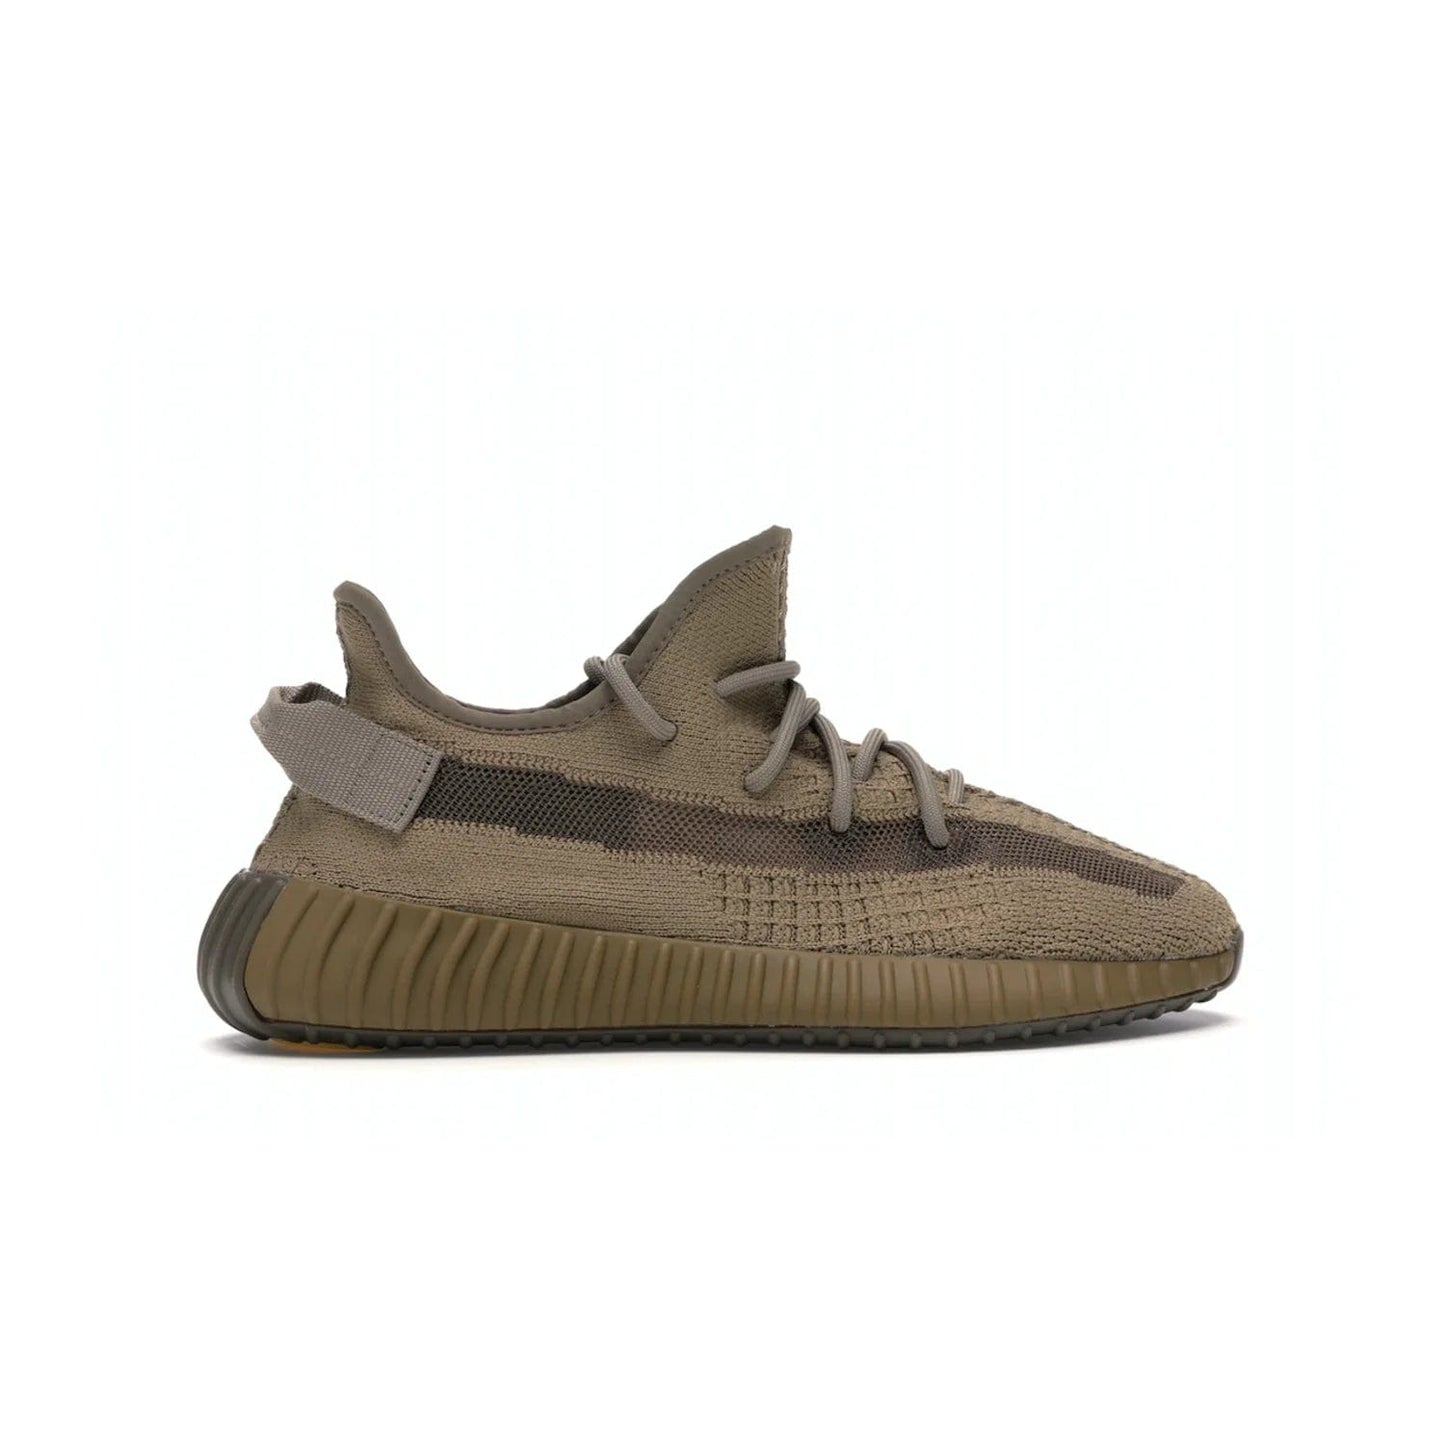 adidas Yeezy Boost 350 V2 Earth - Image 36 - Only at www.BallersClubKickz.com - Abstract style with the adidas Yeezy Boost 350 V2 Earth. Crafted with mud Primeknit upper, mud Boost and interior, and a translucent side stripe. Regional exclusive in Earth/Earth/Earth colorway, these fashionable sneakers released in February 2020. Showcase your style with the Yeezy 350 V2 Earth.